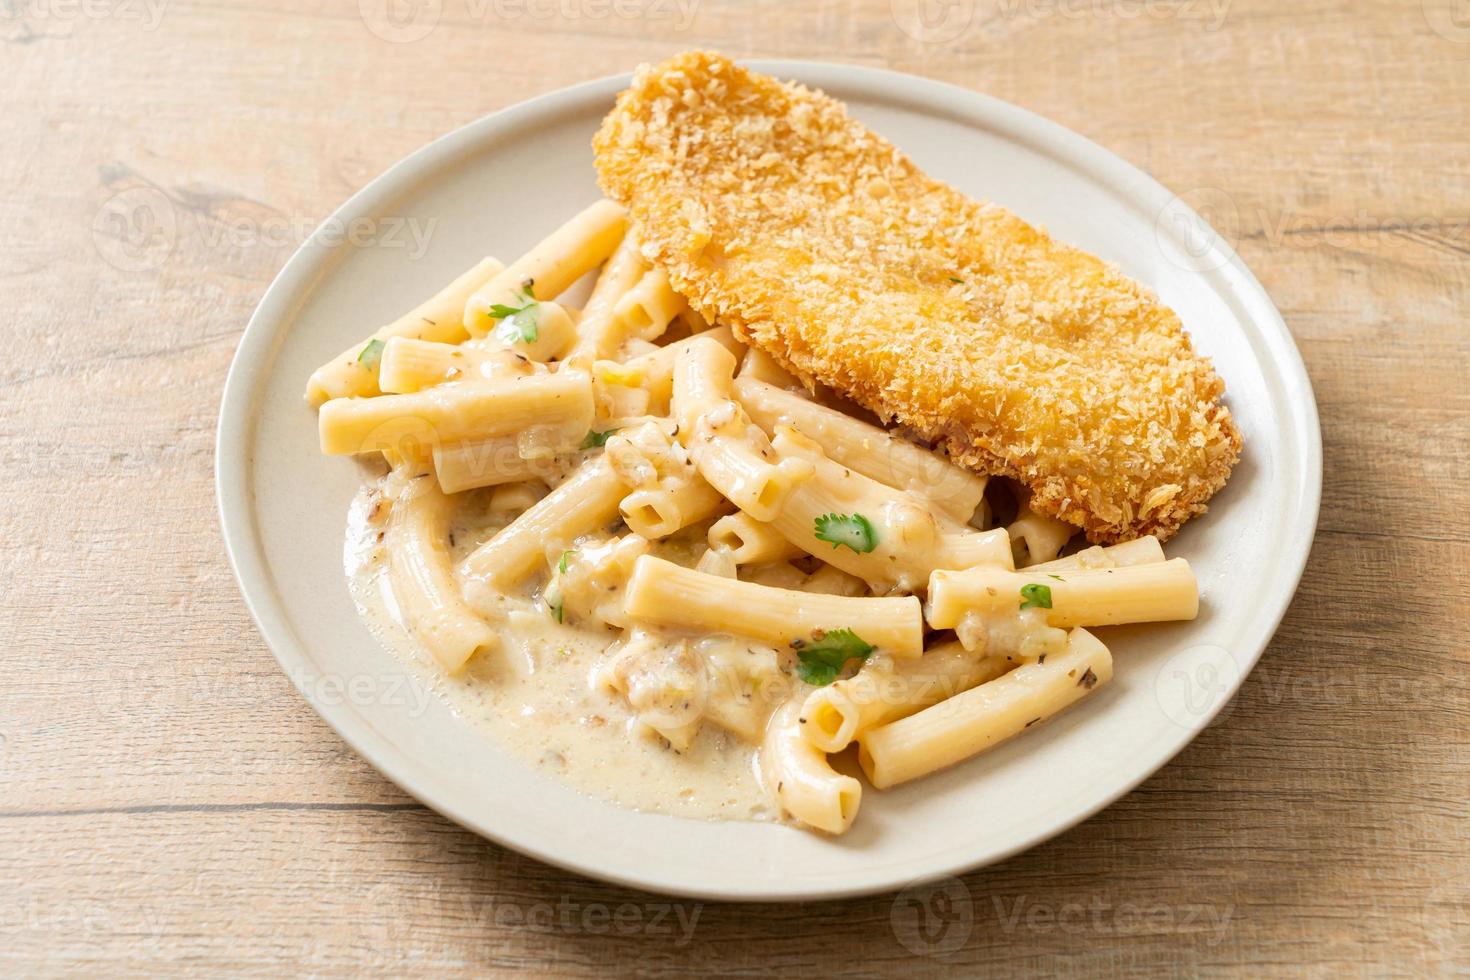 Homemade quadrotto penne pasta white cream sauce with fried fish photo